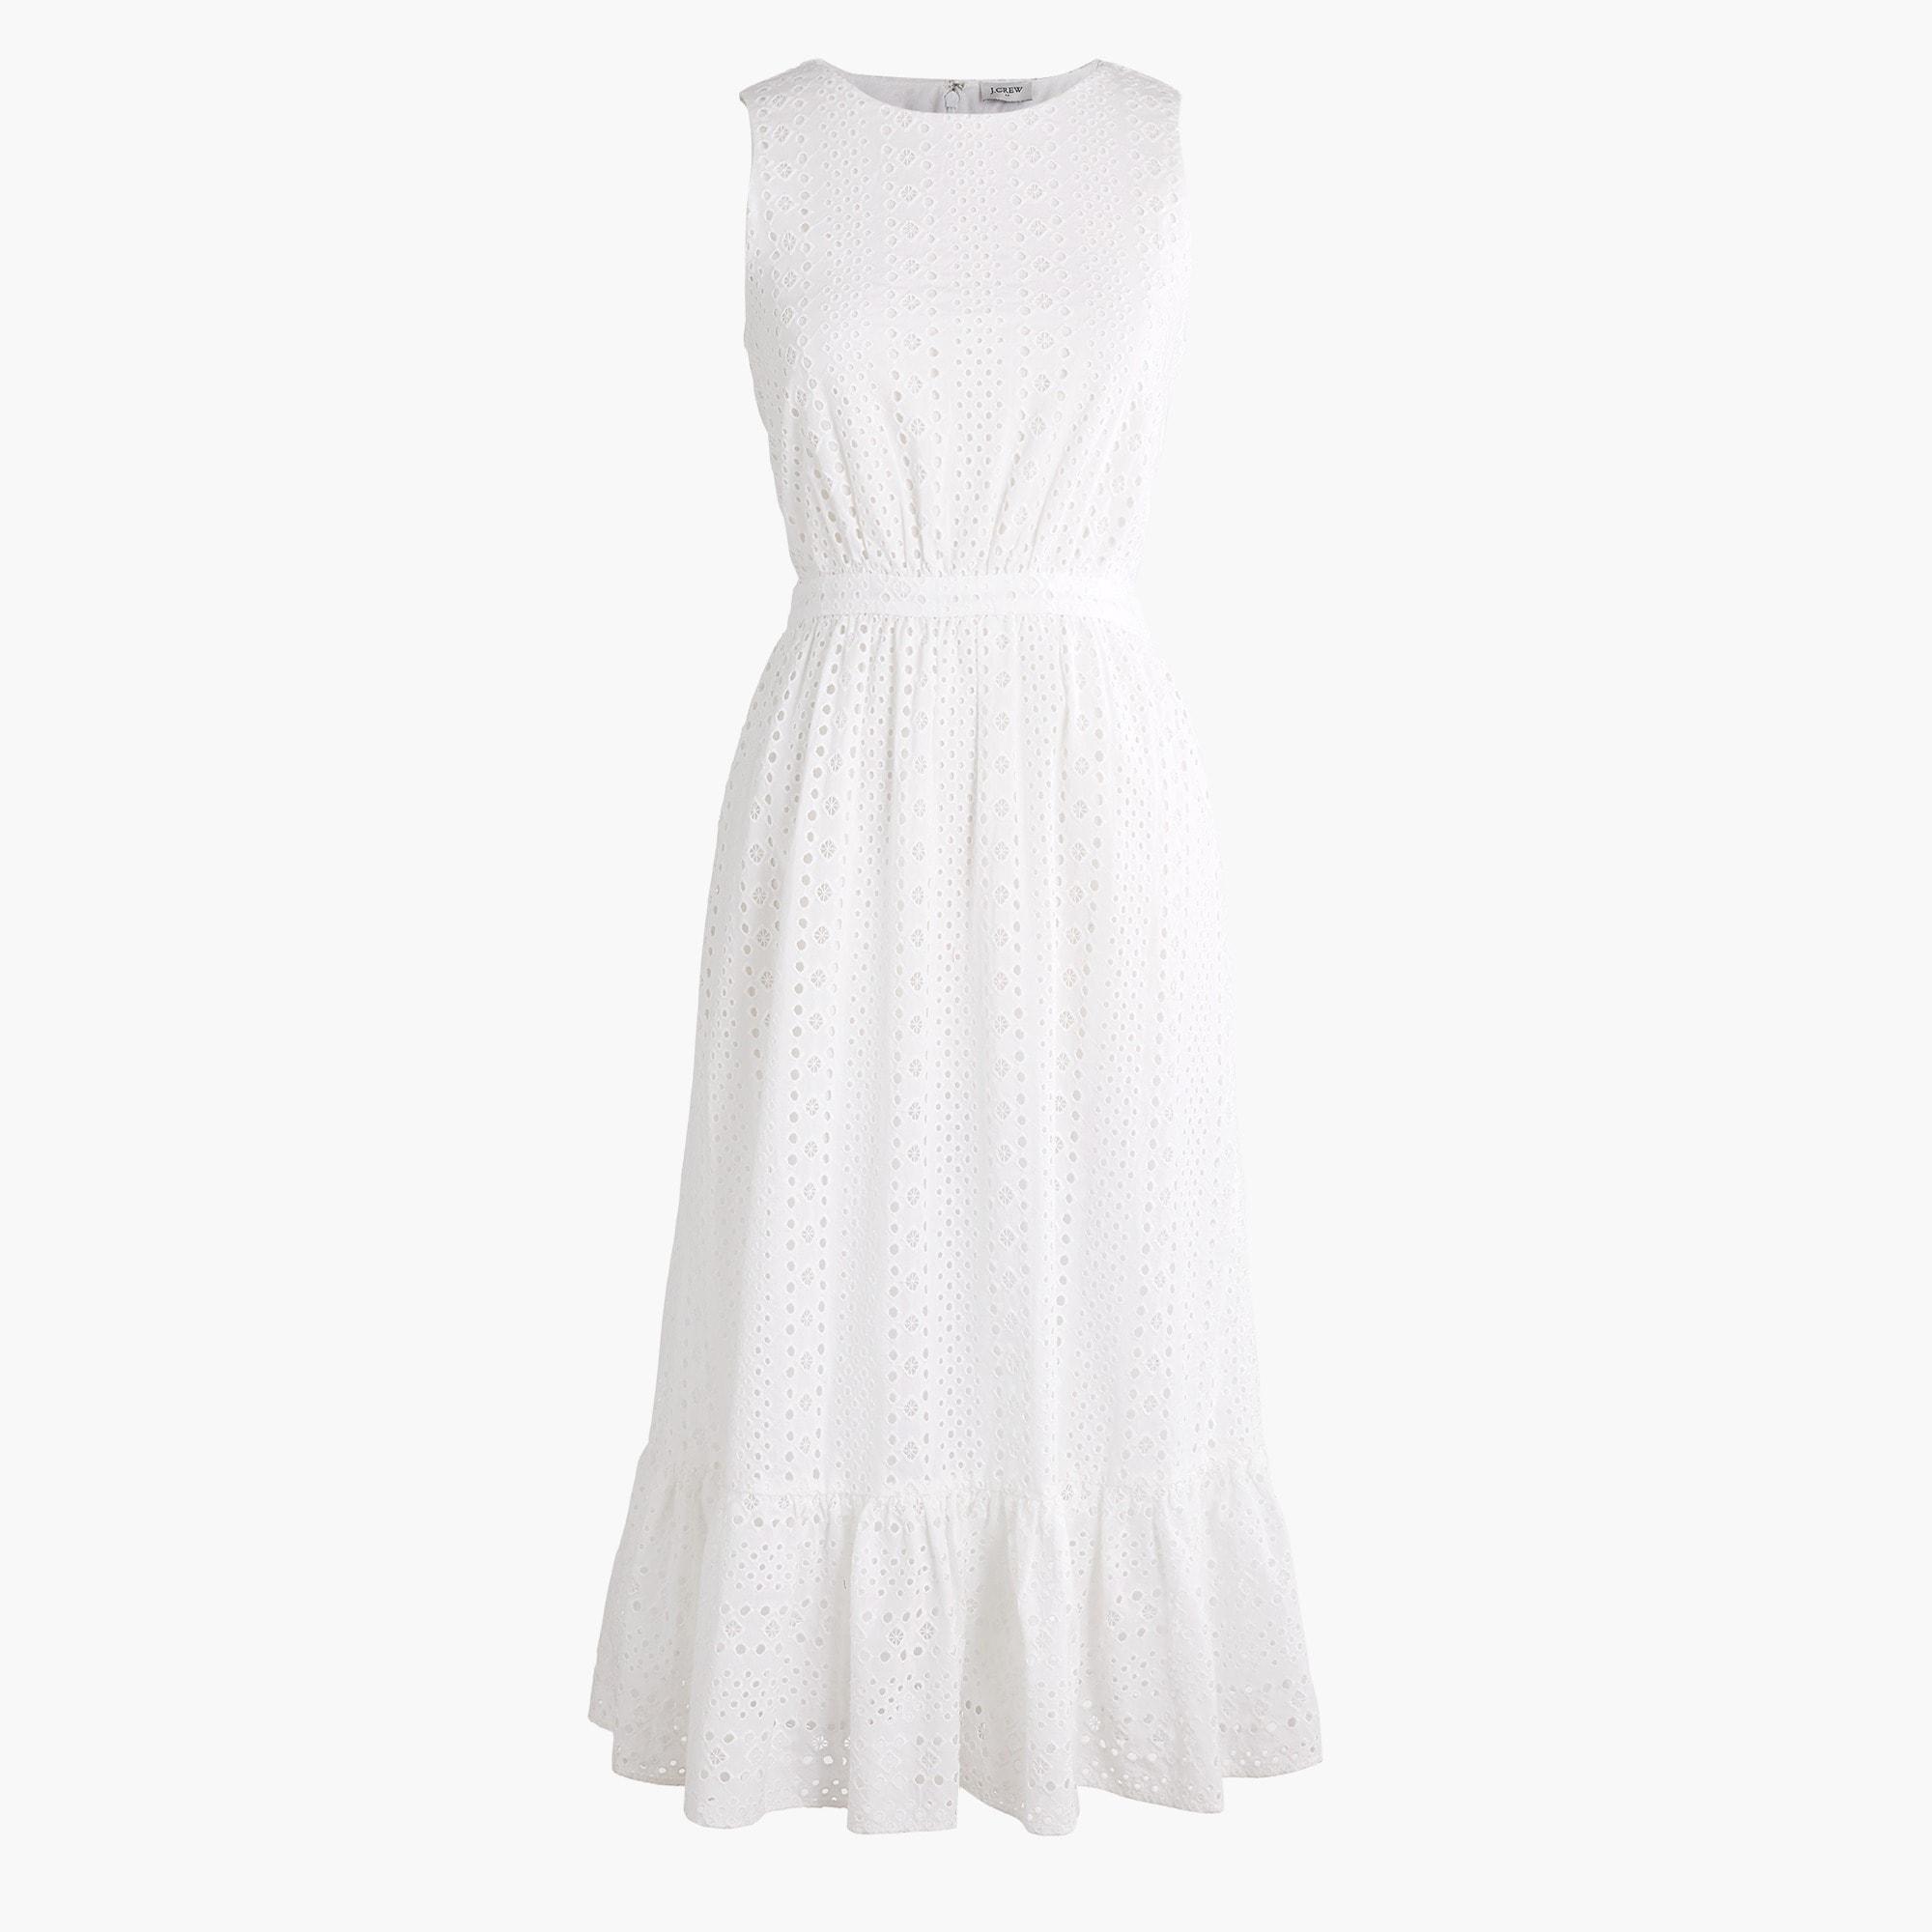 J.Crew Cotton Eyelet-embroidered Tiered Midi Dress in White - Lyst